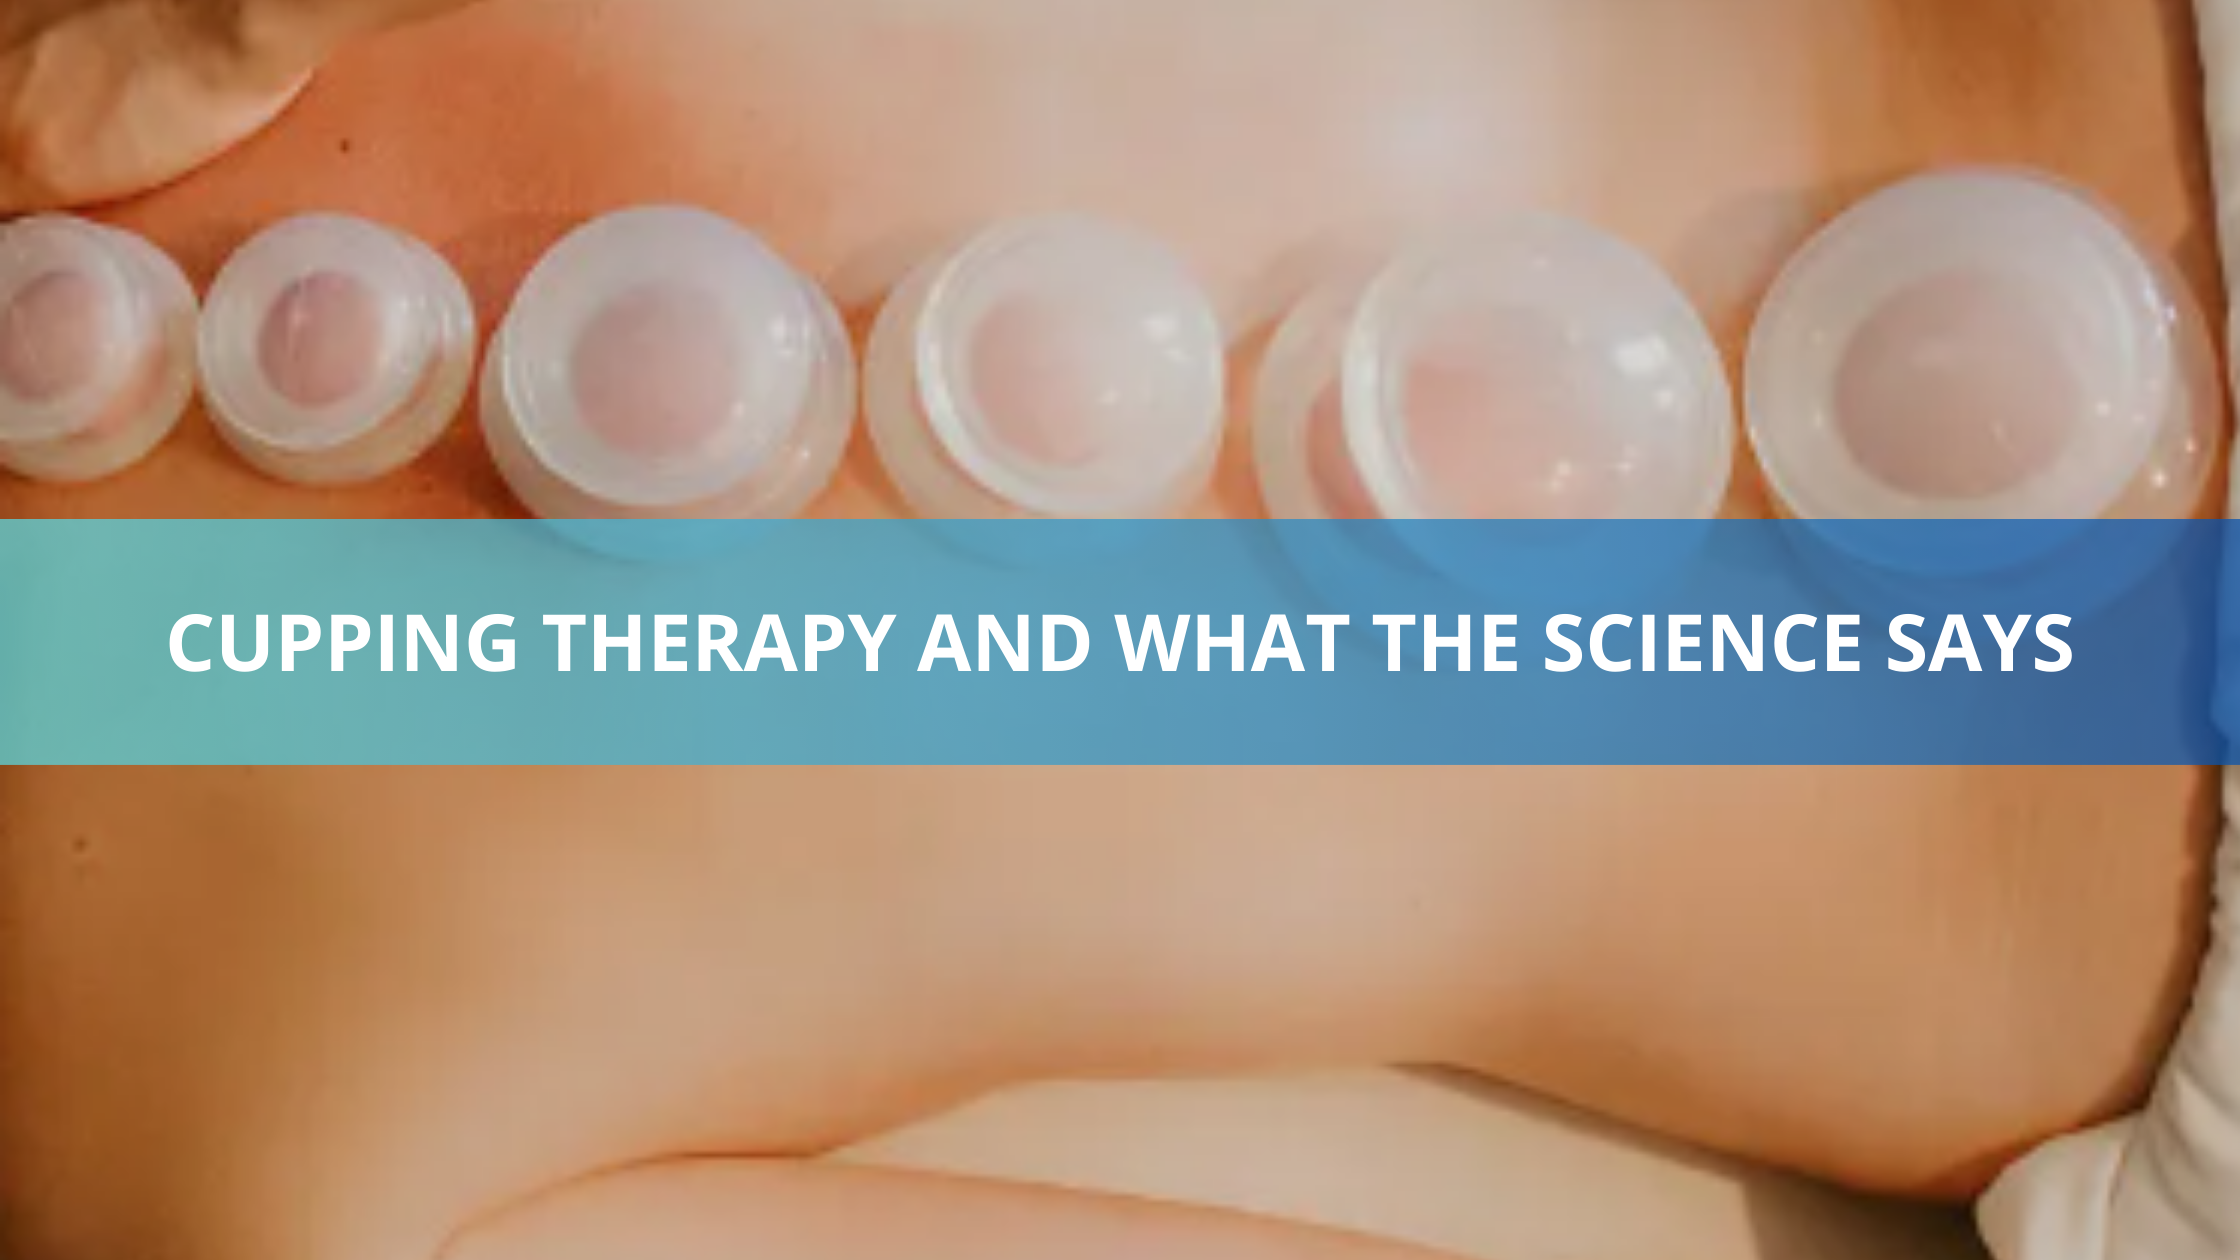 CUPPING THERAPY: WHAT THE SCIENCE SAYS